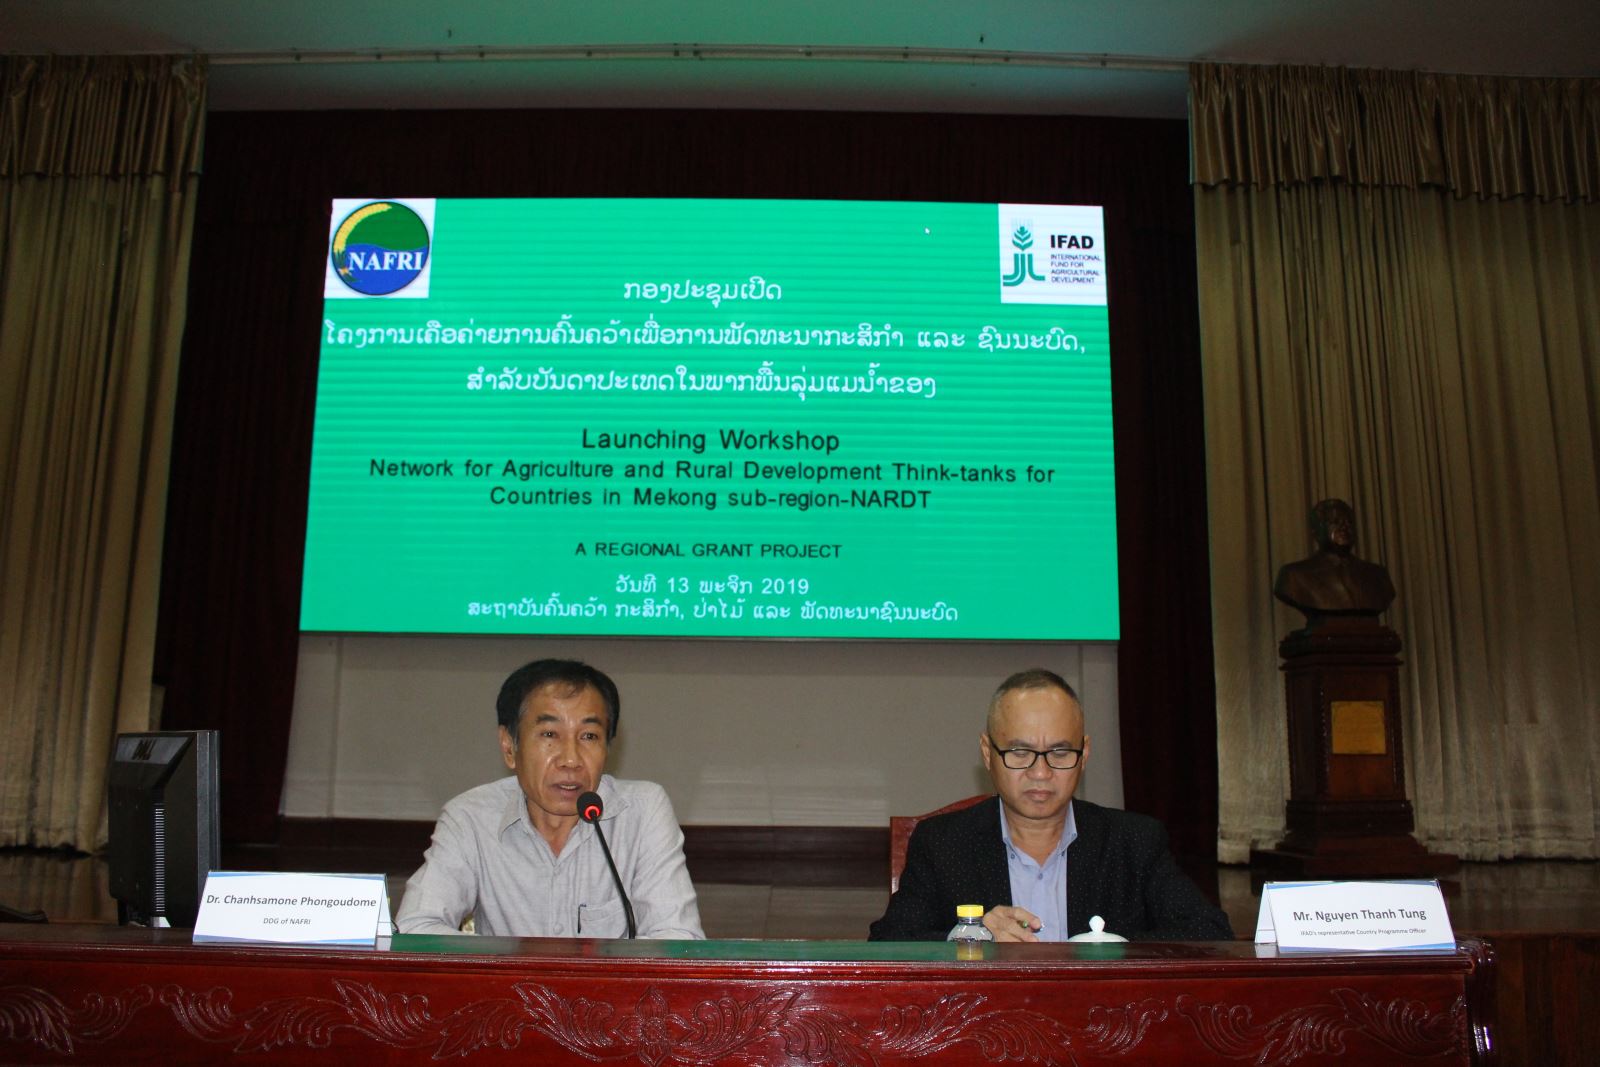 Dr. Chanhsamone Phongoudome, Deputy Director General of NAFRI, and Mr. Nguyen Thanh Tung, Country Programme Officer of the IFAD, co-chaired the workshop.